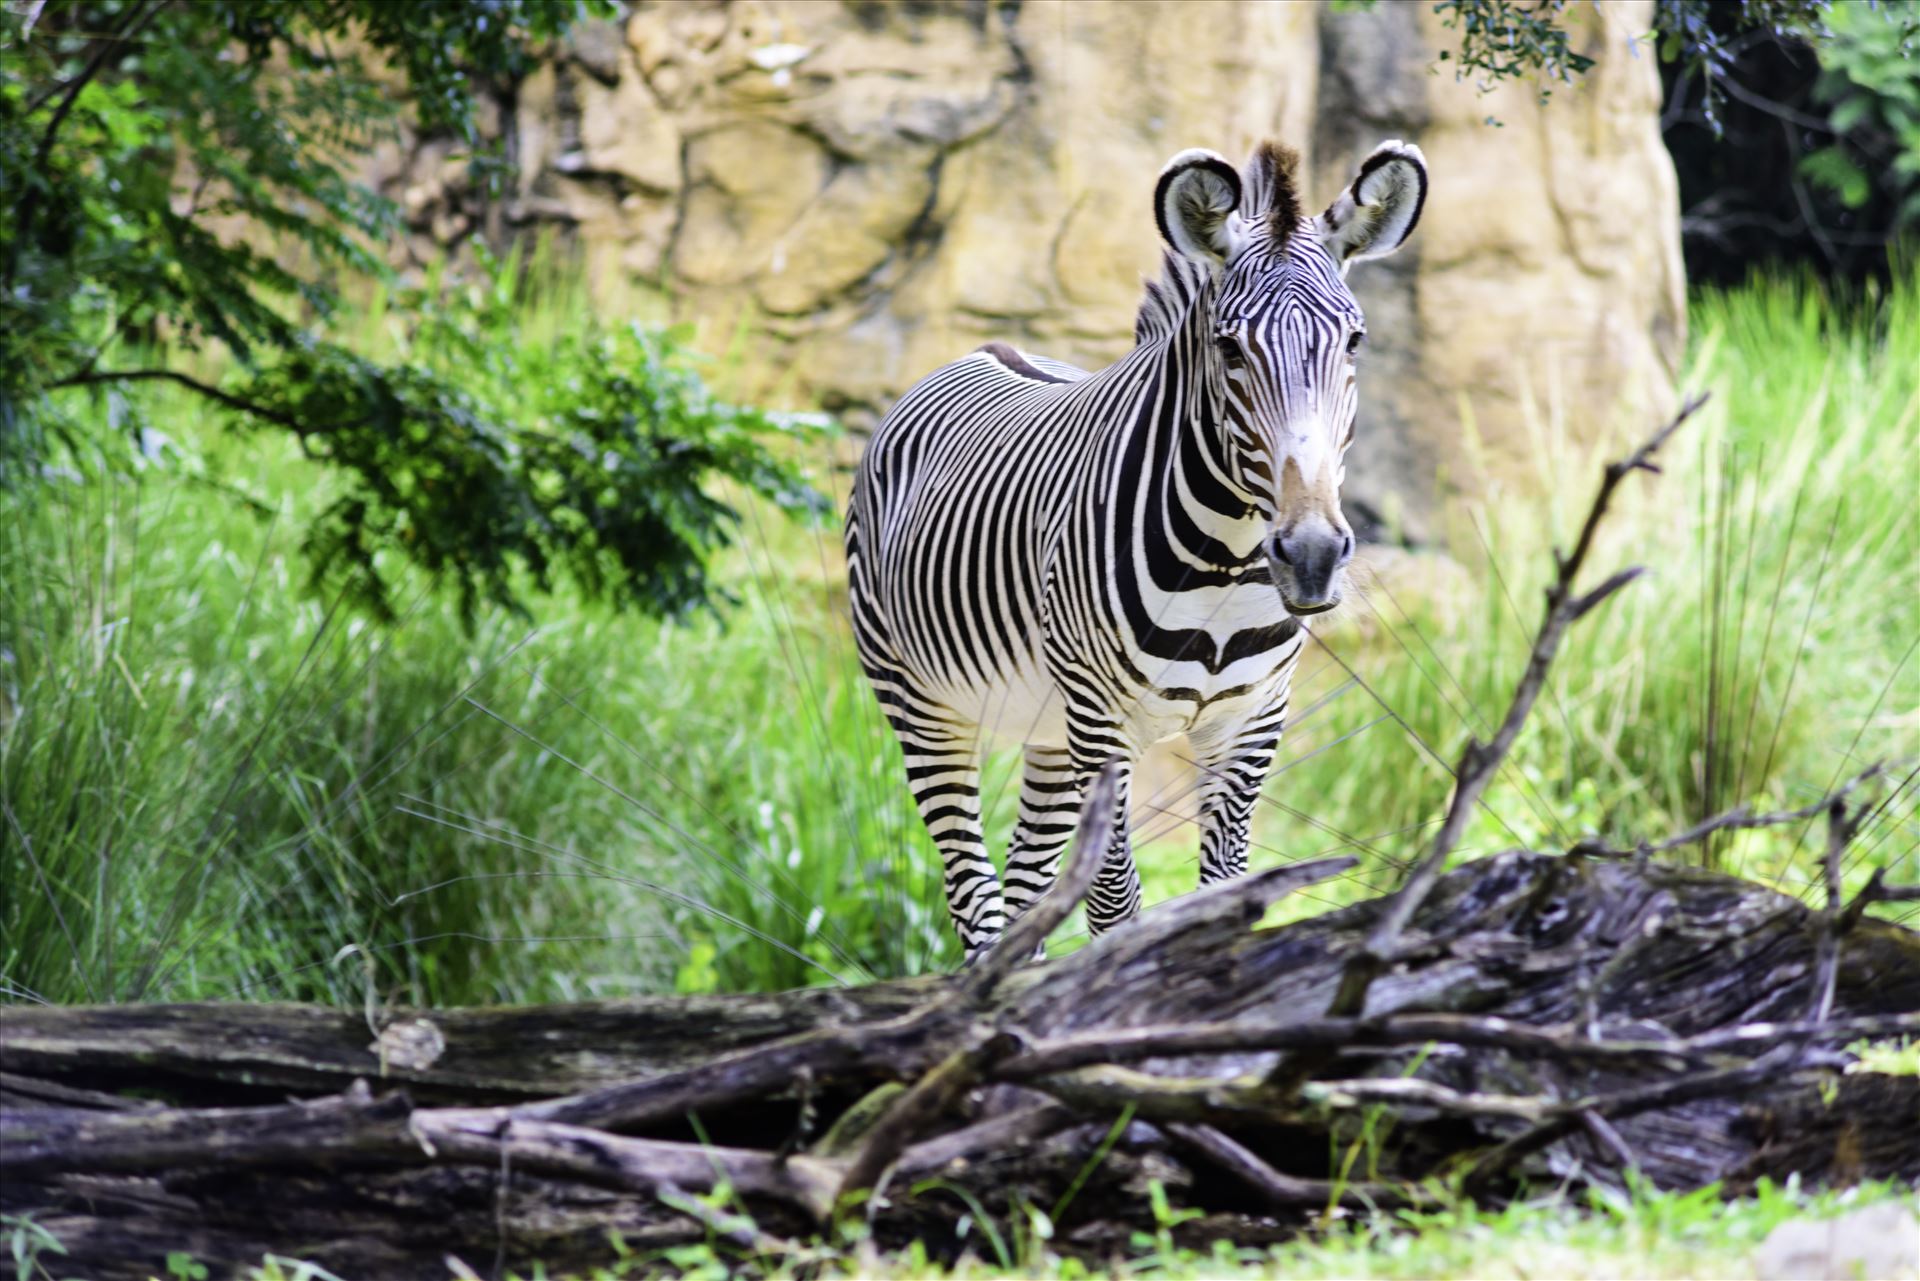 _RAW0078.jpg - Zebra standing in the wilderness  by Terry Kelly Photography